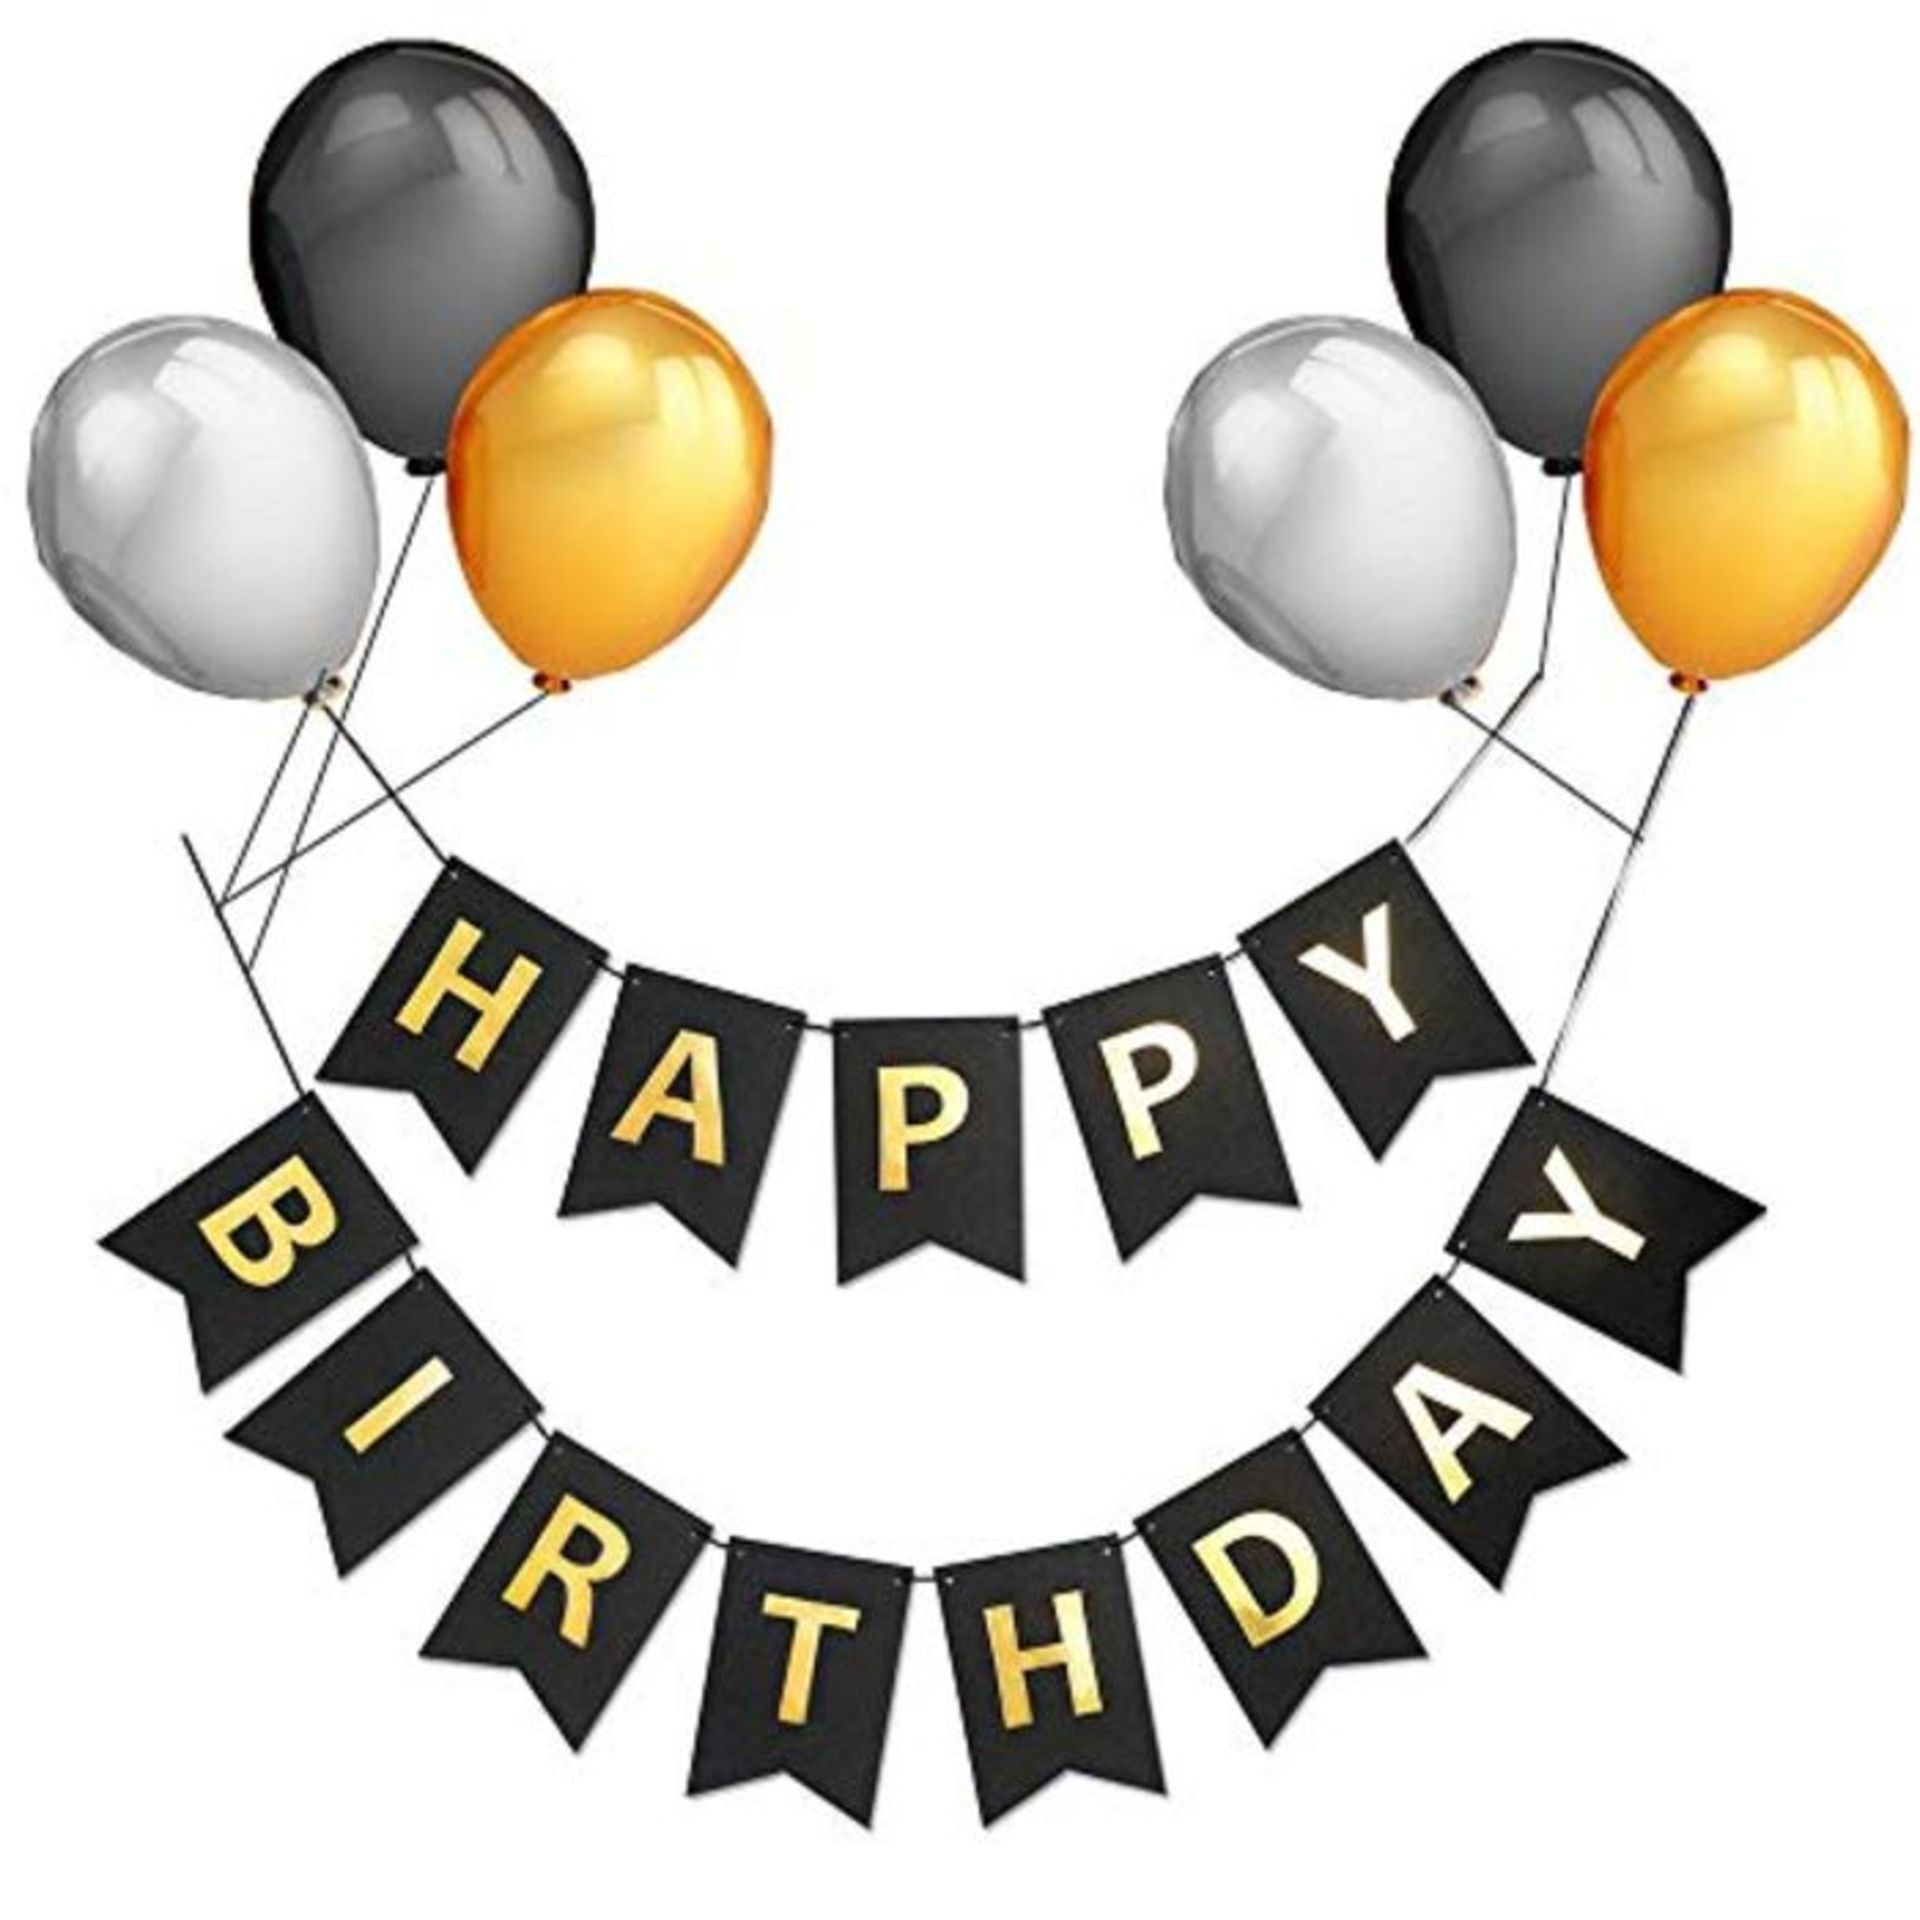 AUERVO Happy Birthday Banner, Large Black Birthday Bunting with Shiny Gold Letters and